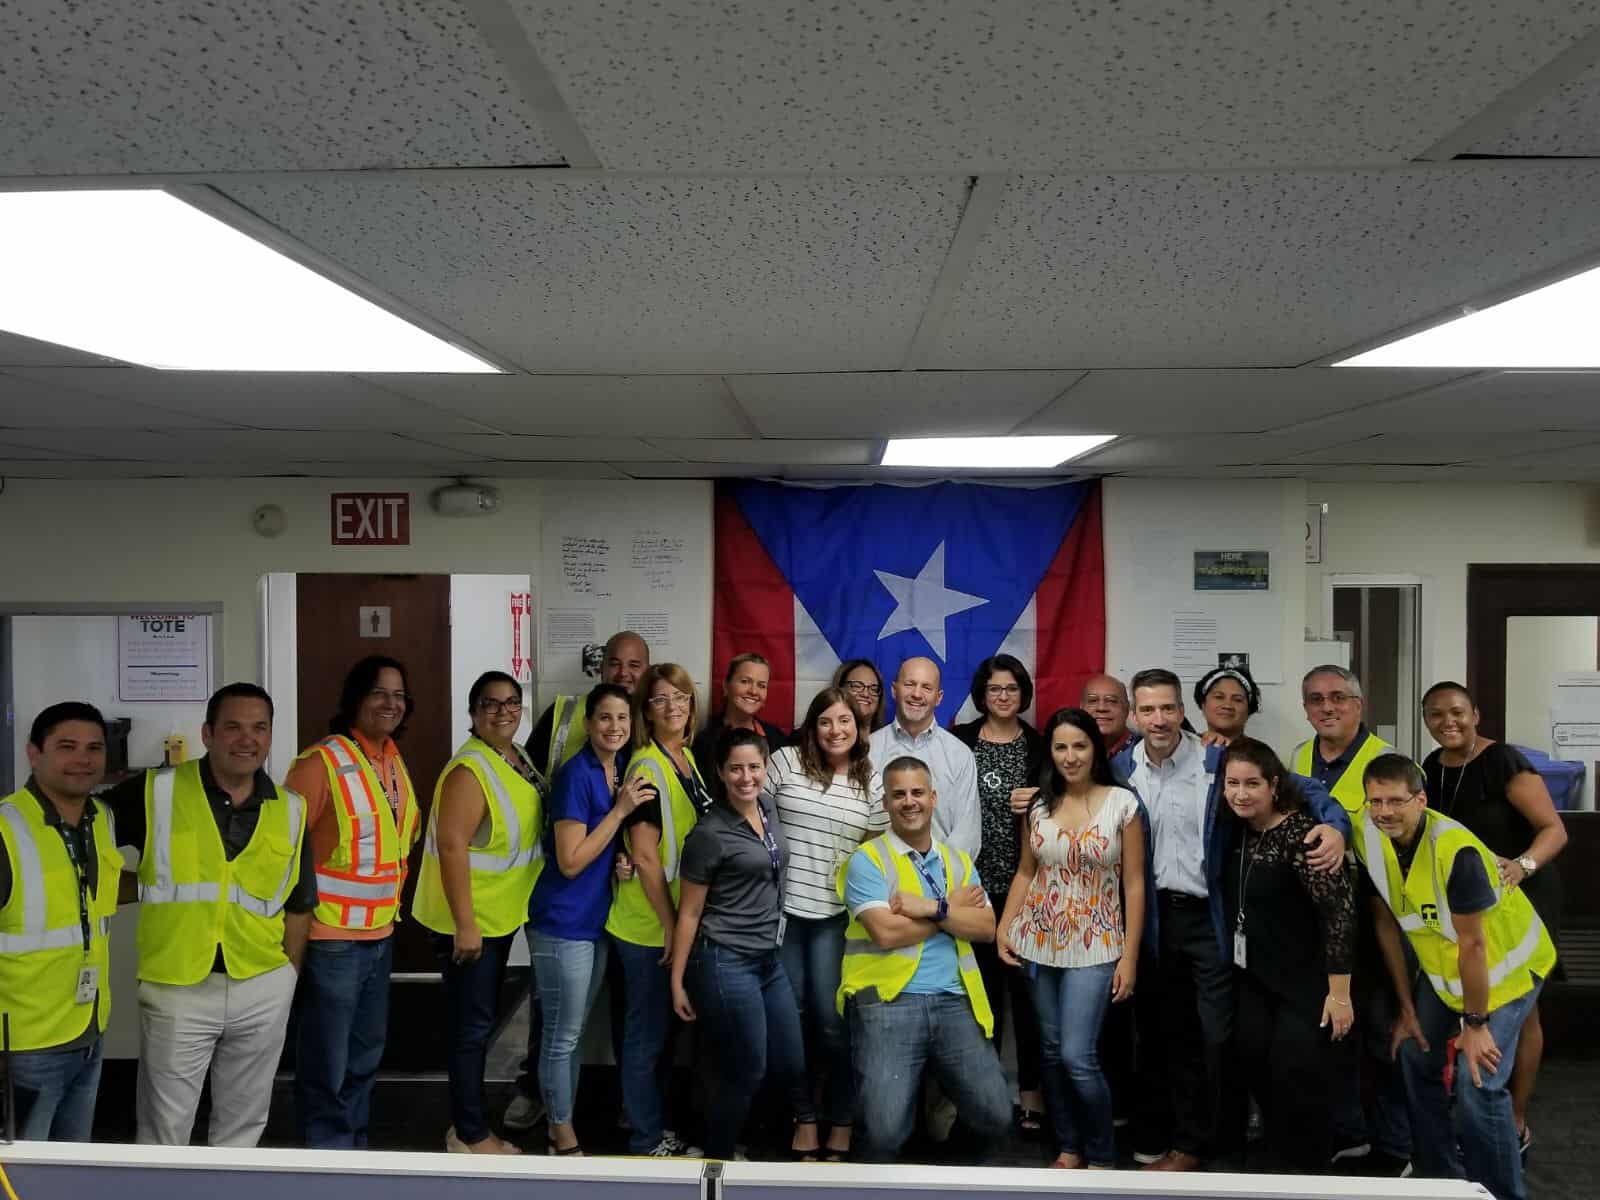 TOTE Maritime Puerto Rico gathers for a photo while working to help those affected by the hurricane.